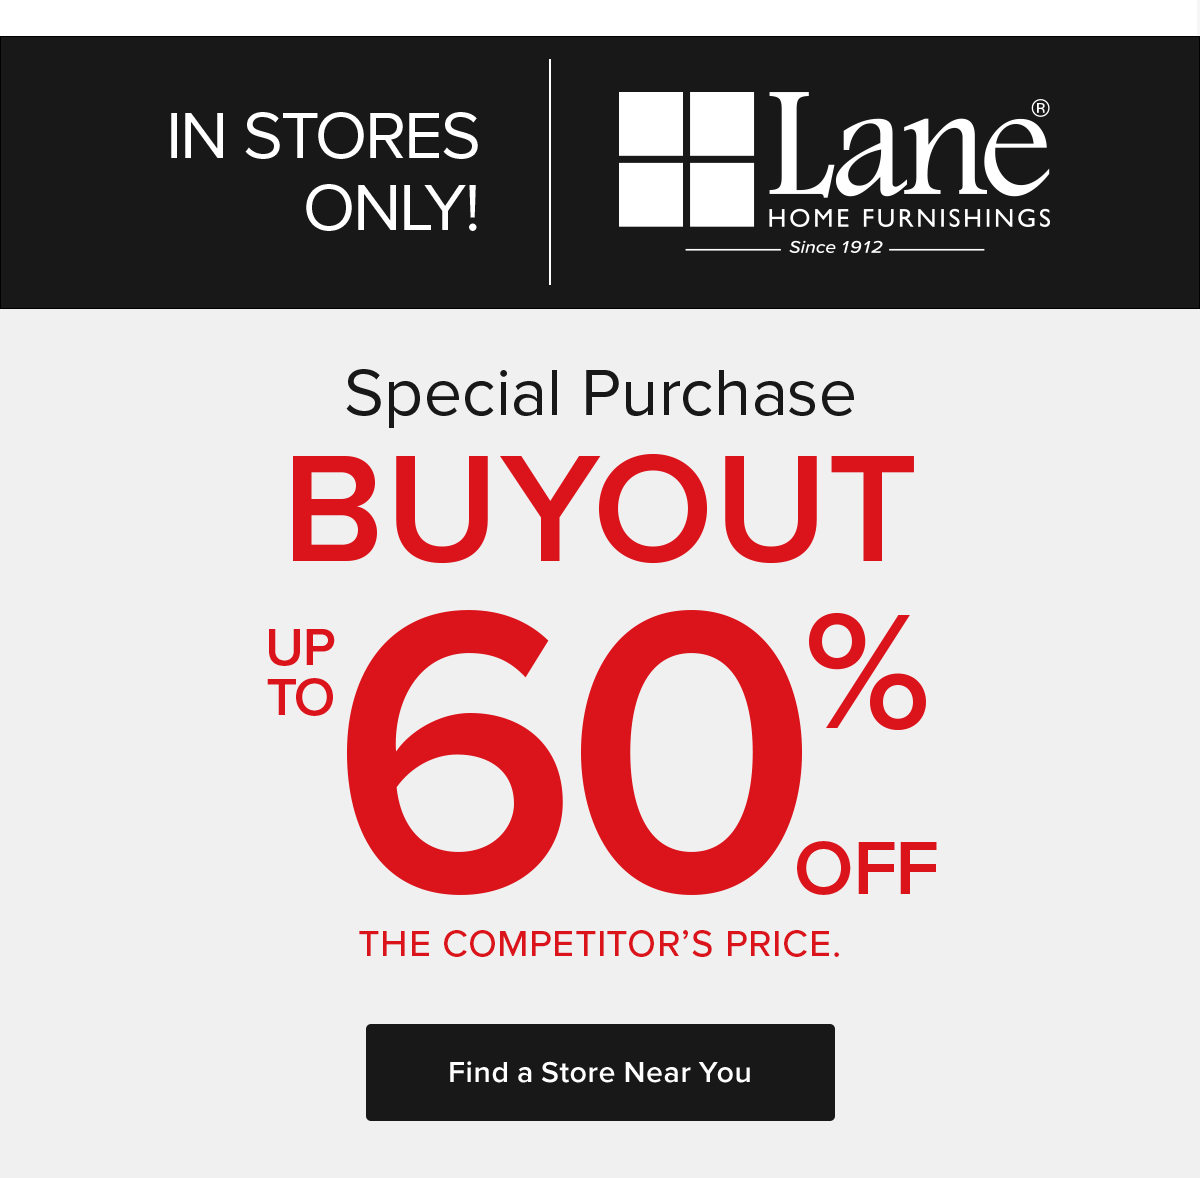 In Stores Only | Lane Furnishings Buyout